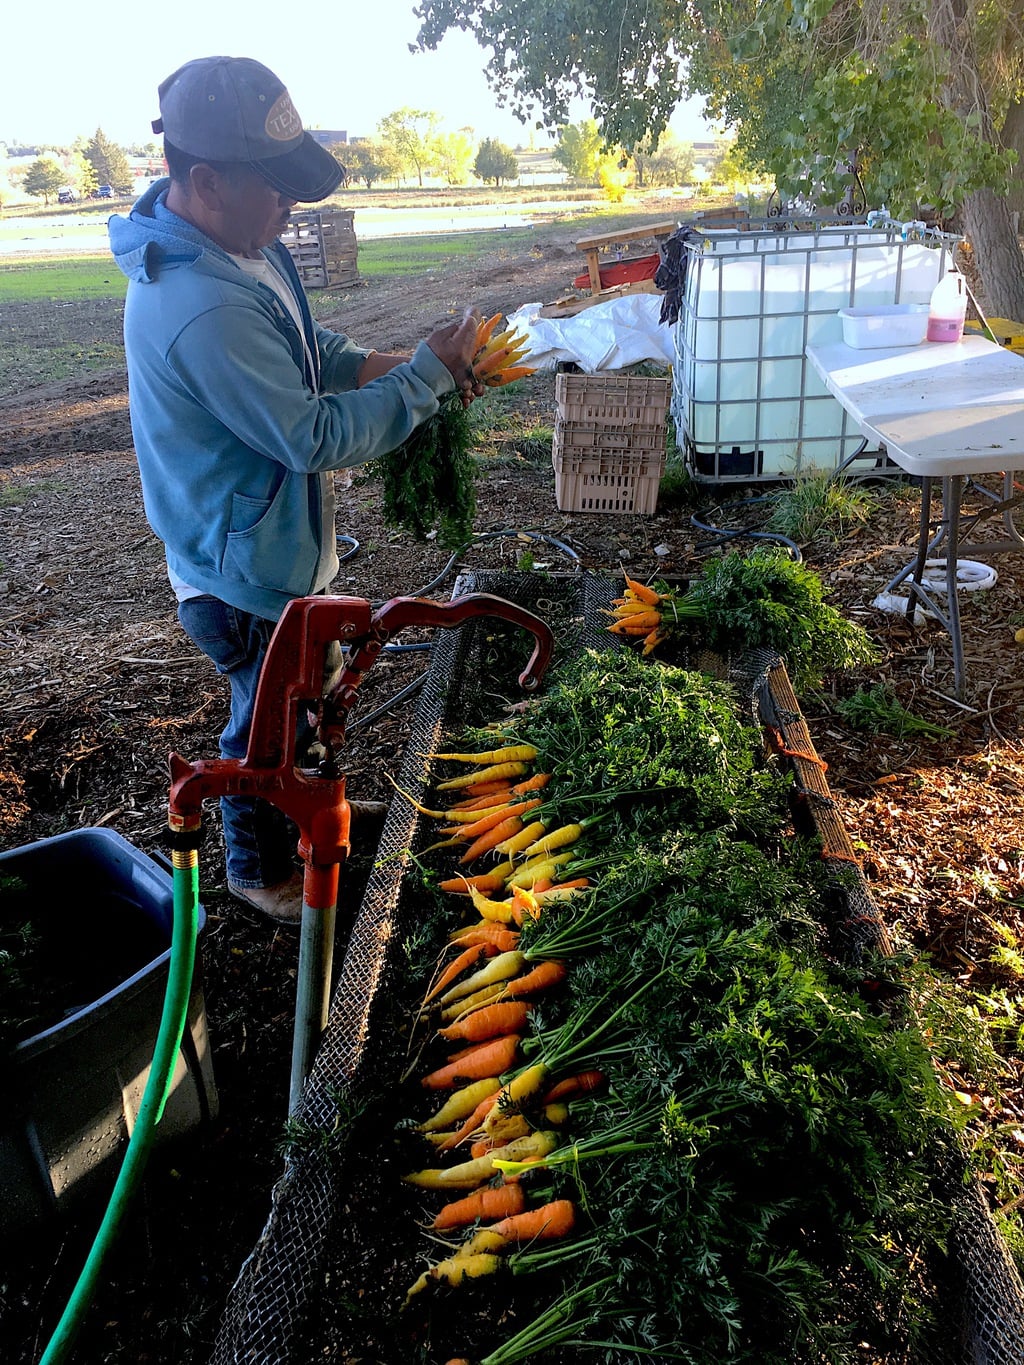 As the season for many plants persists well into November, cleaning vegetables, like these carrots, becomes increasingly more difficult. Cold!